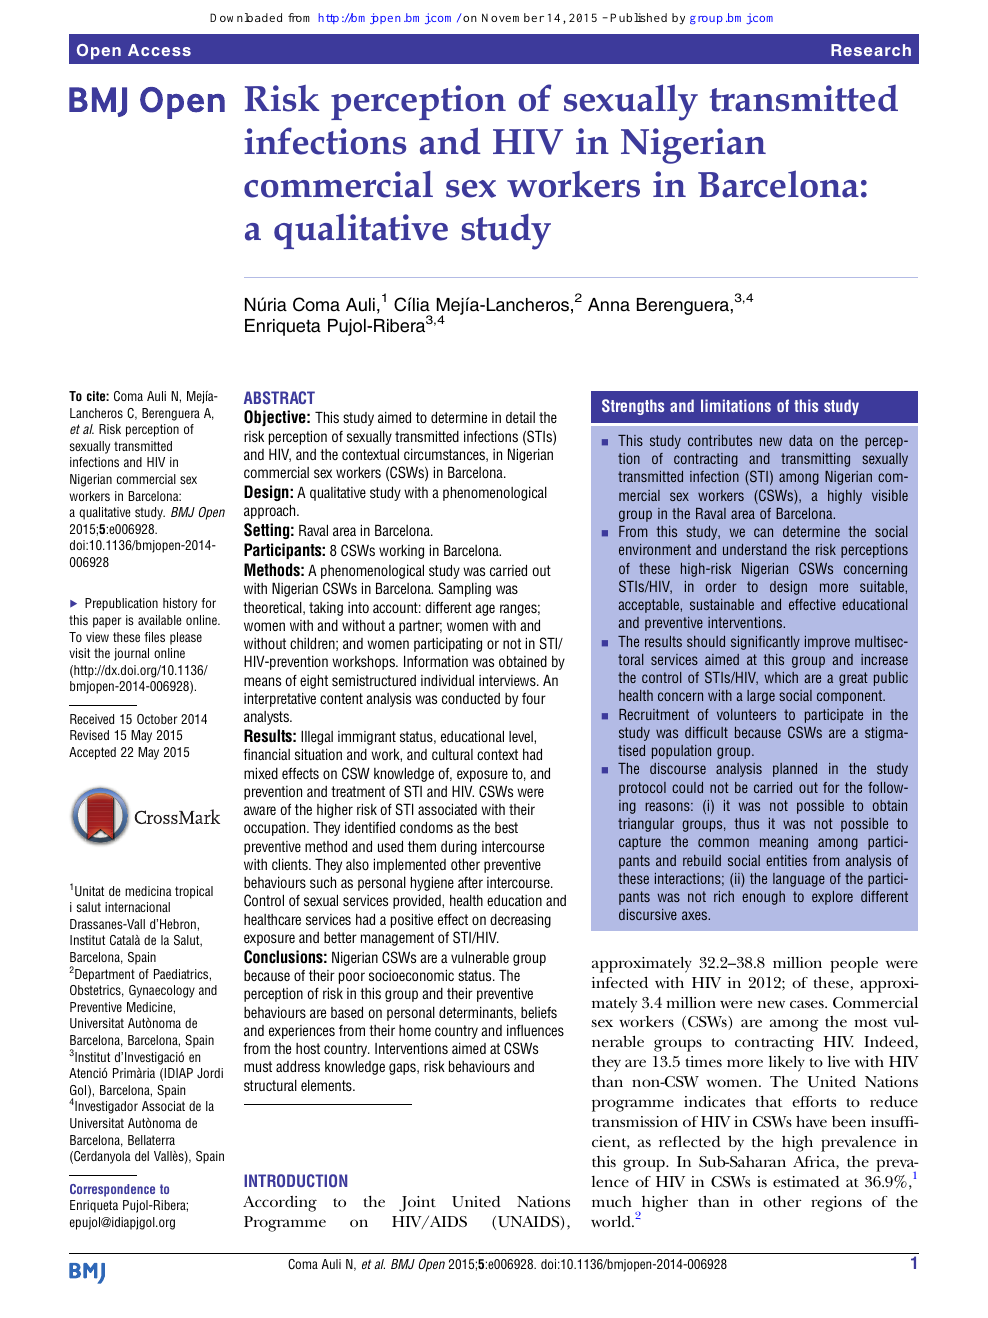 Risk perception of sexually transmitted infections and HIV in Nigerian commercial sex workers in Barcelona a qualitative study